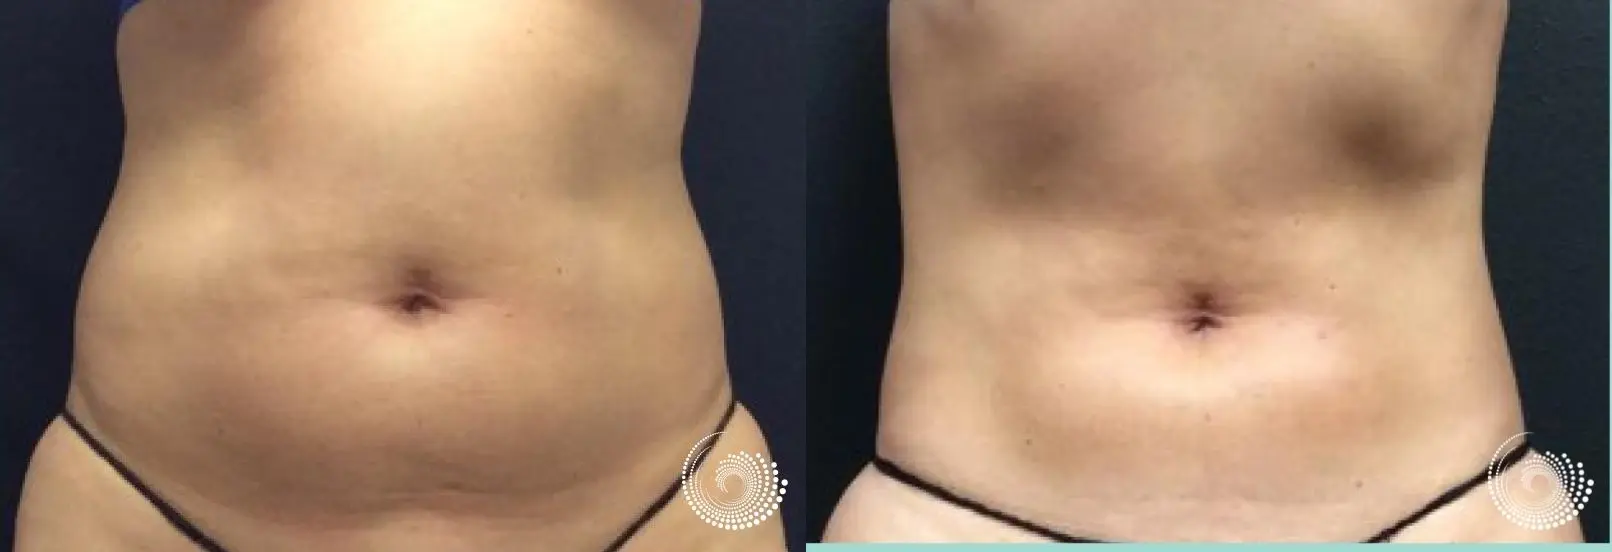 CoolSculpting Elite, reducing fat on tummy & flanks, before and after